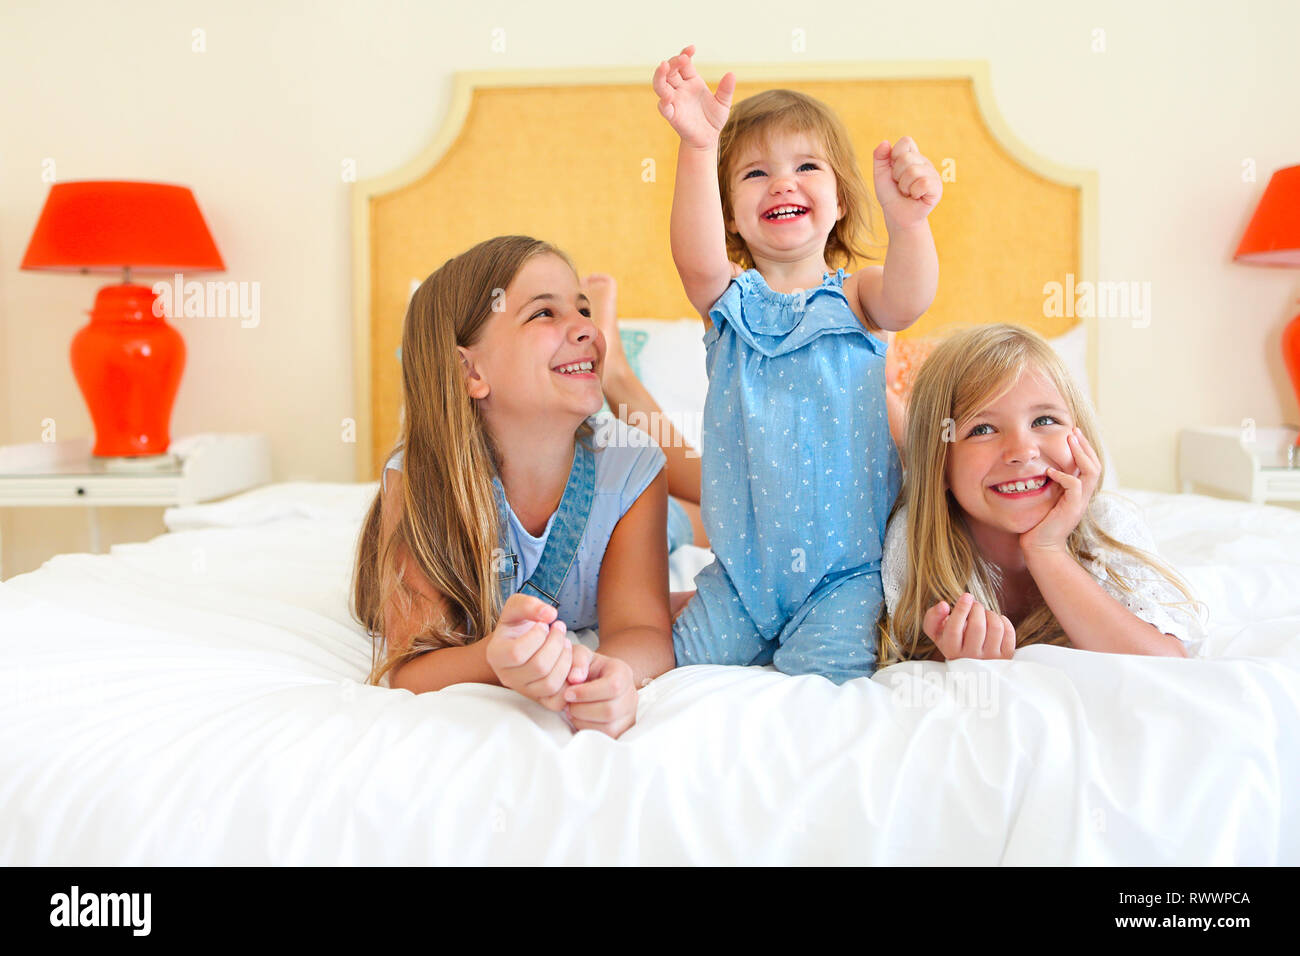 Three happy little sisters on a bed having fun Stock Photo